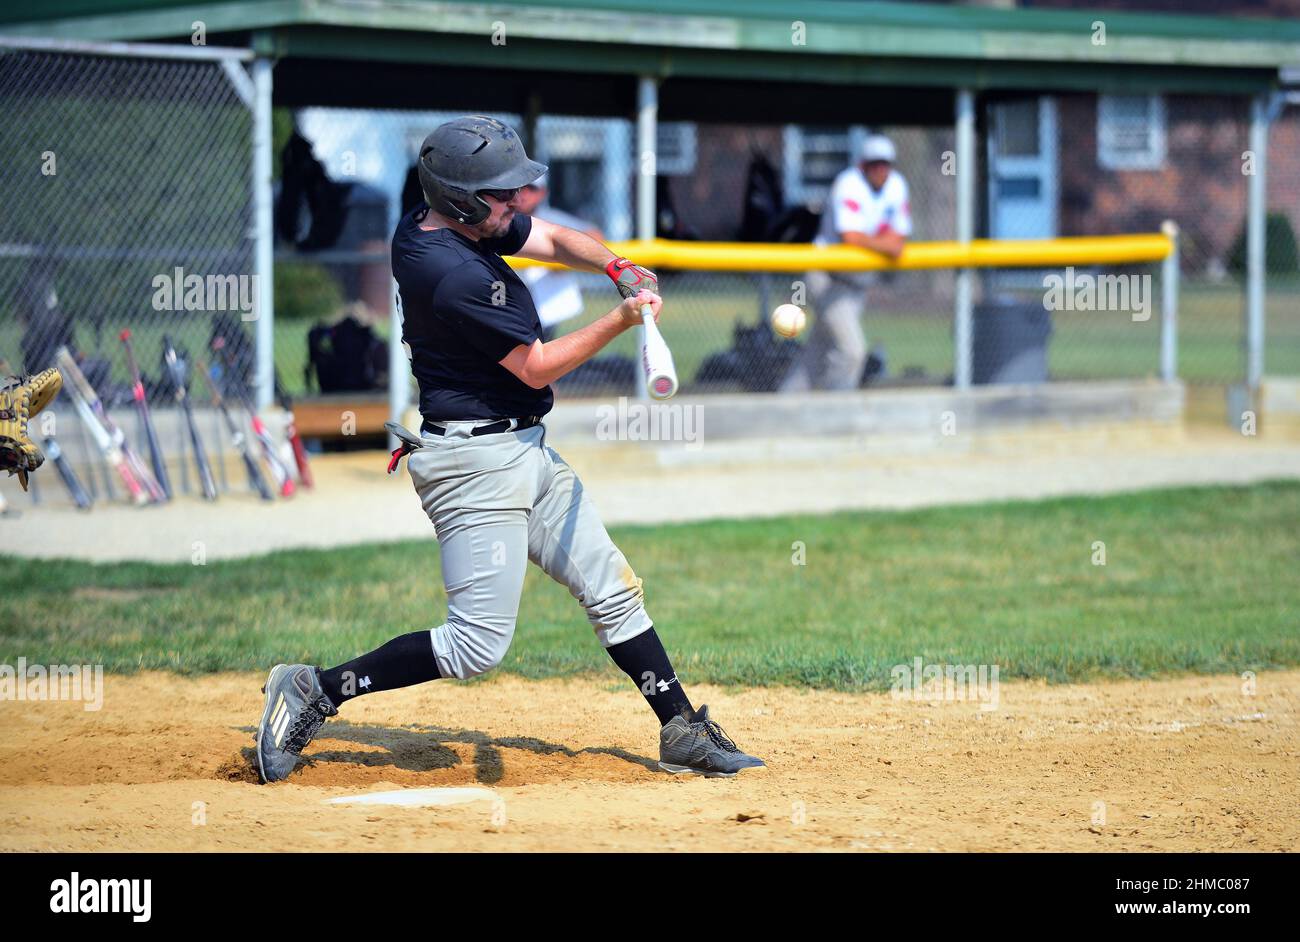 Johnsburg, Illinois, USA. A batter swinging at a pitch during a men's amateur baseball game in northeastern Illinois. Stock Photo